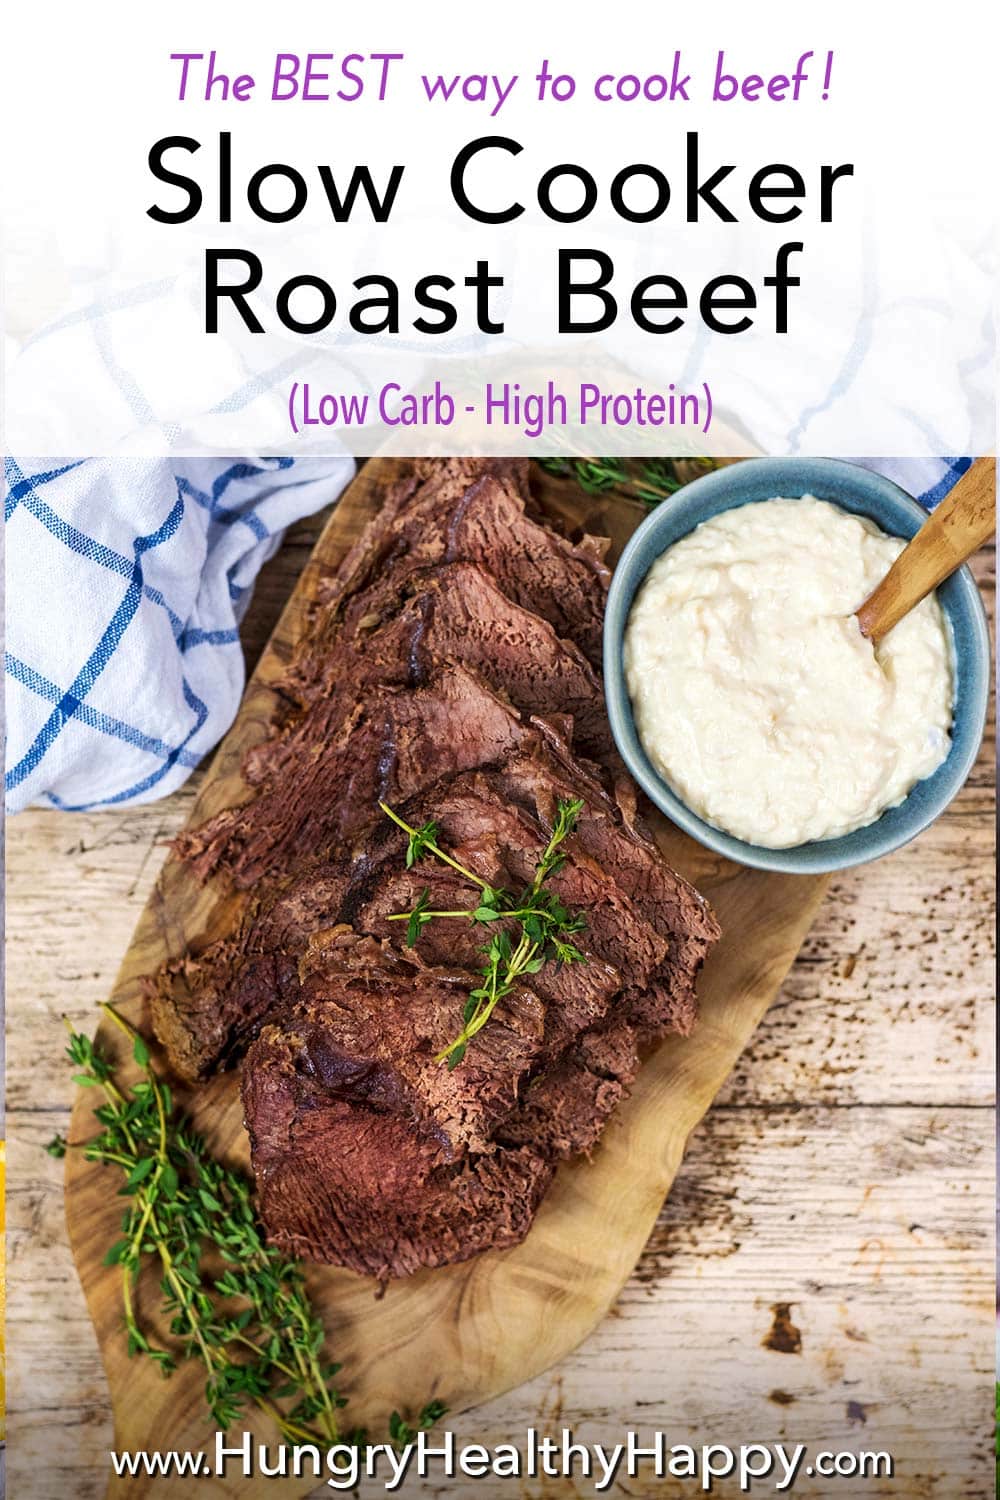 Slow Cooker Roast Beef - Hungry Healthy Happy